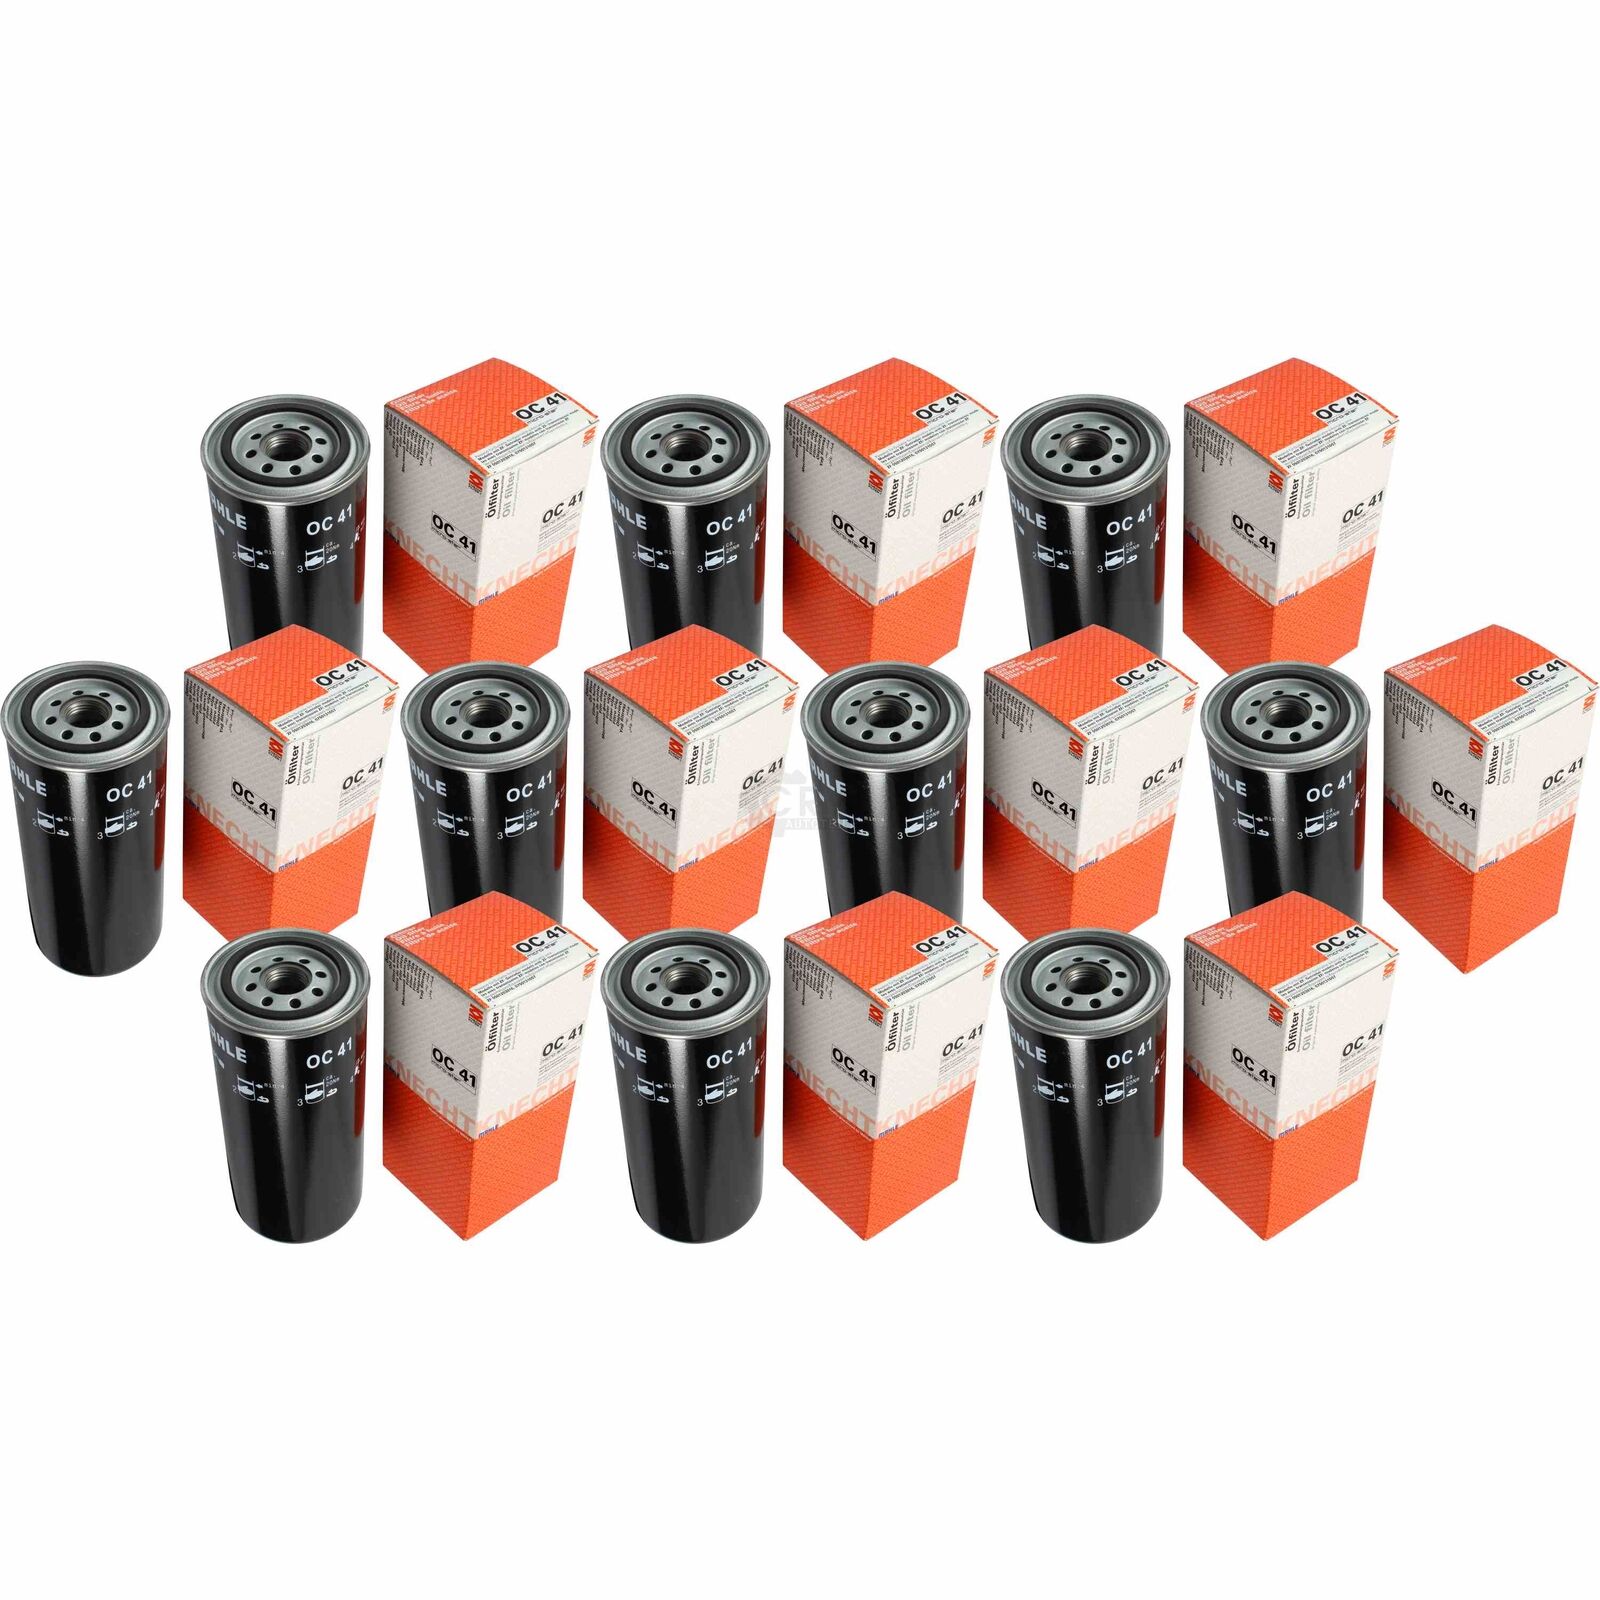 10x MAHLE/Knecht Oil Filter Hydraulic Filter for Automatic Gearbox OC 41